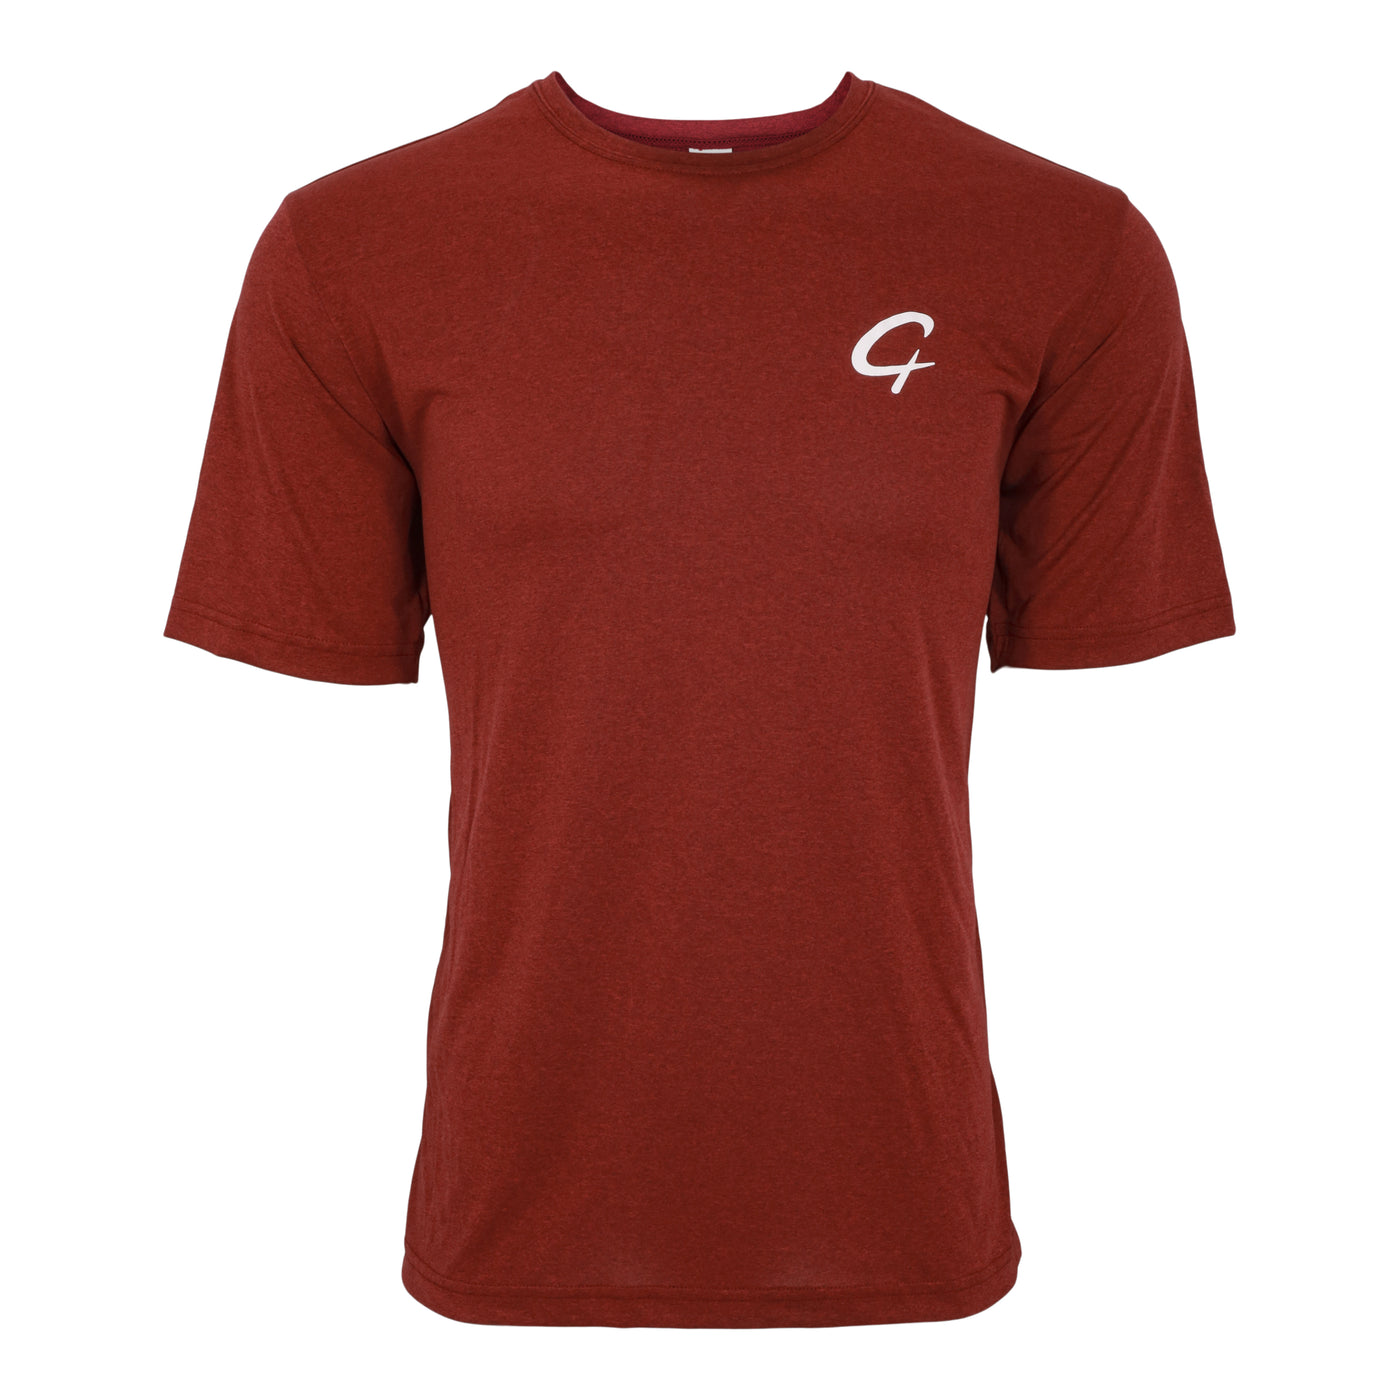 Created Men's Performance maroon short sleeve t-shirt front view